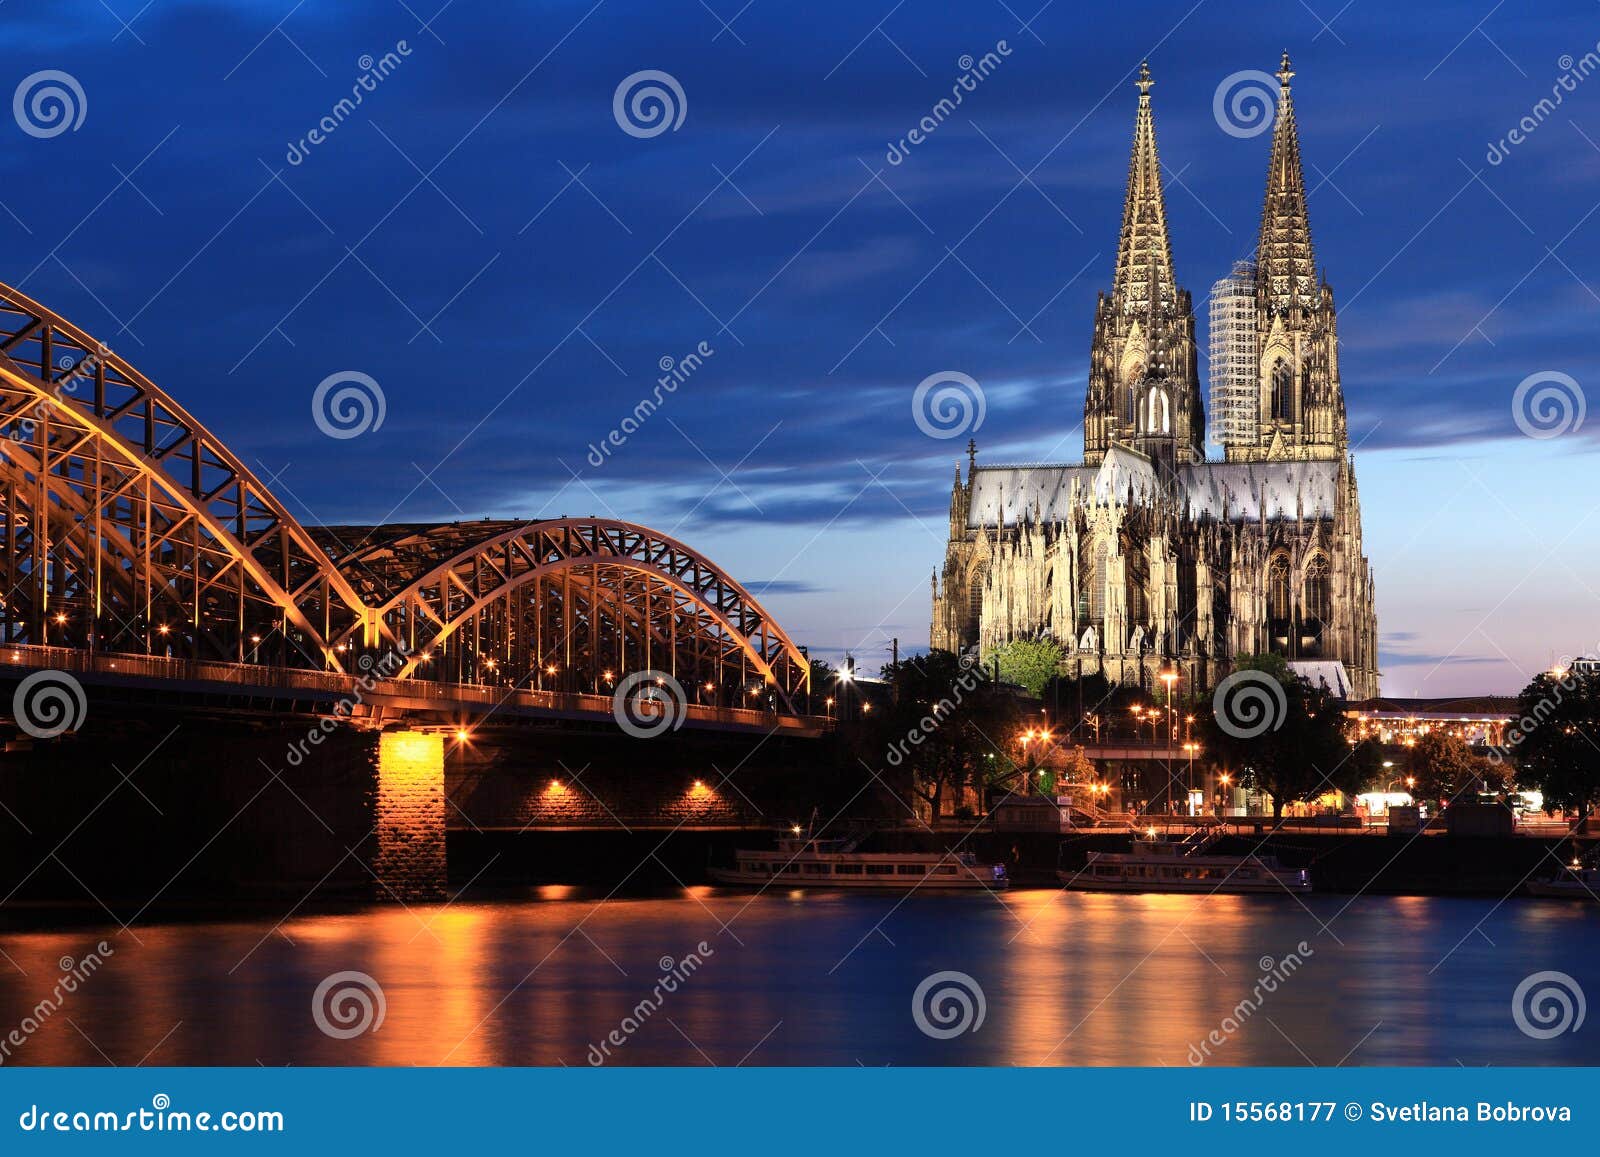 cologne cathedral and hohencollernbridge